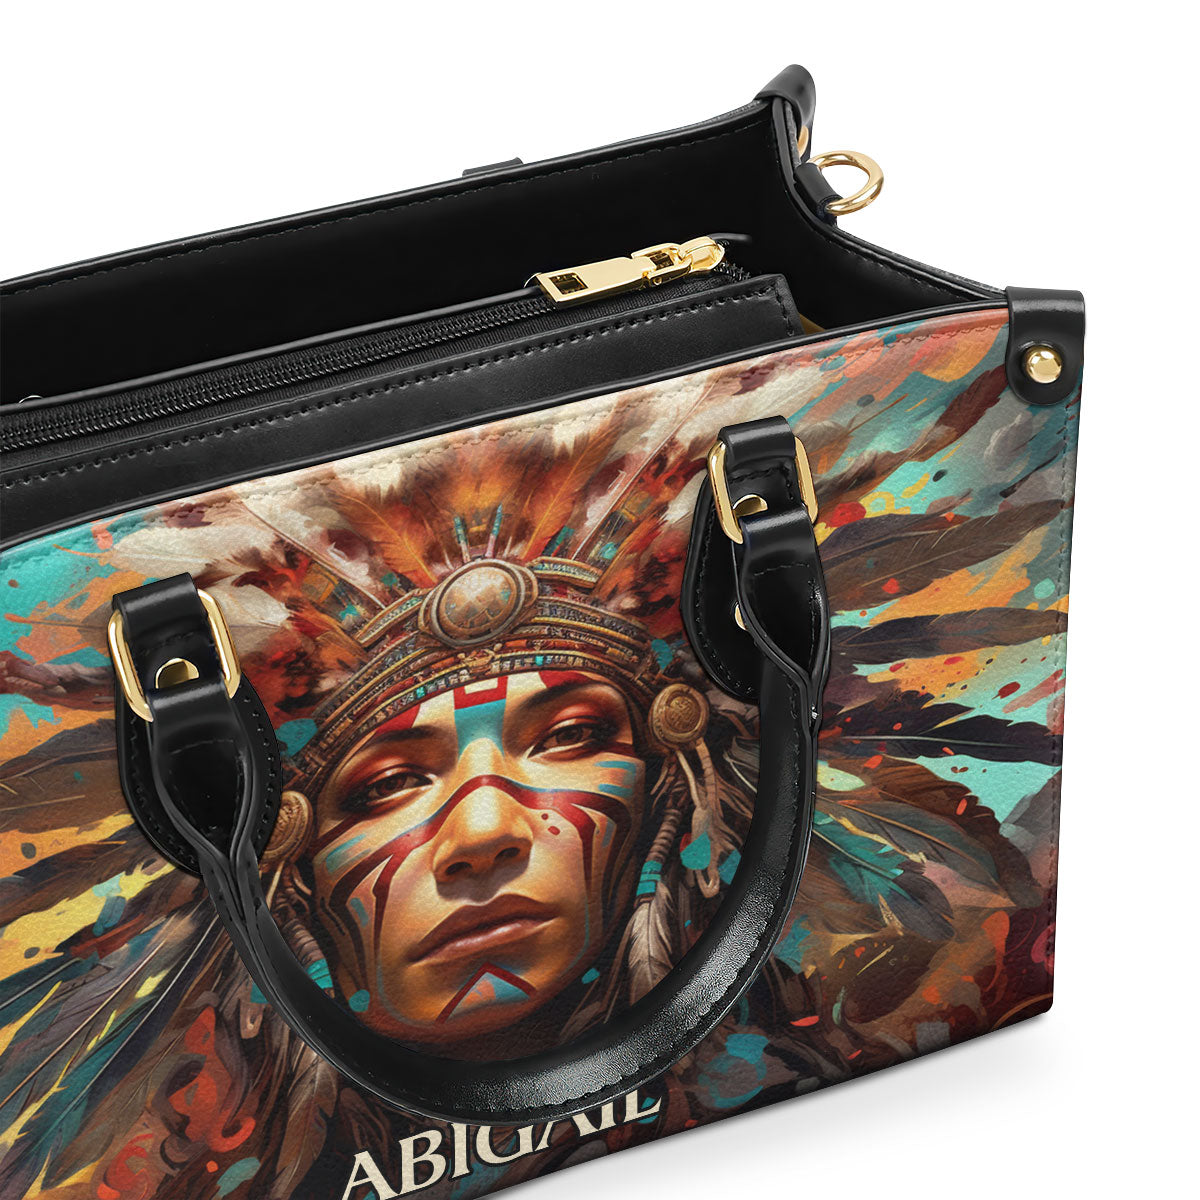 Powerful Native American - Personalized Leather Handbag MS122